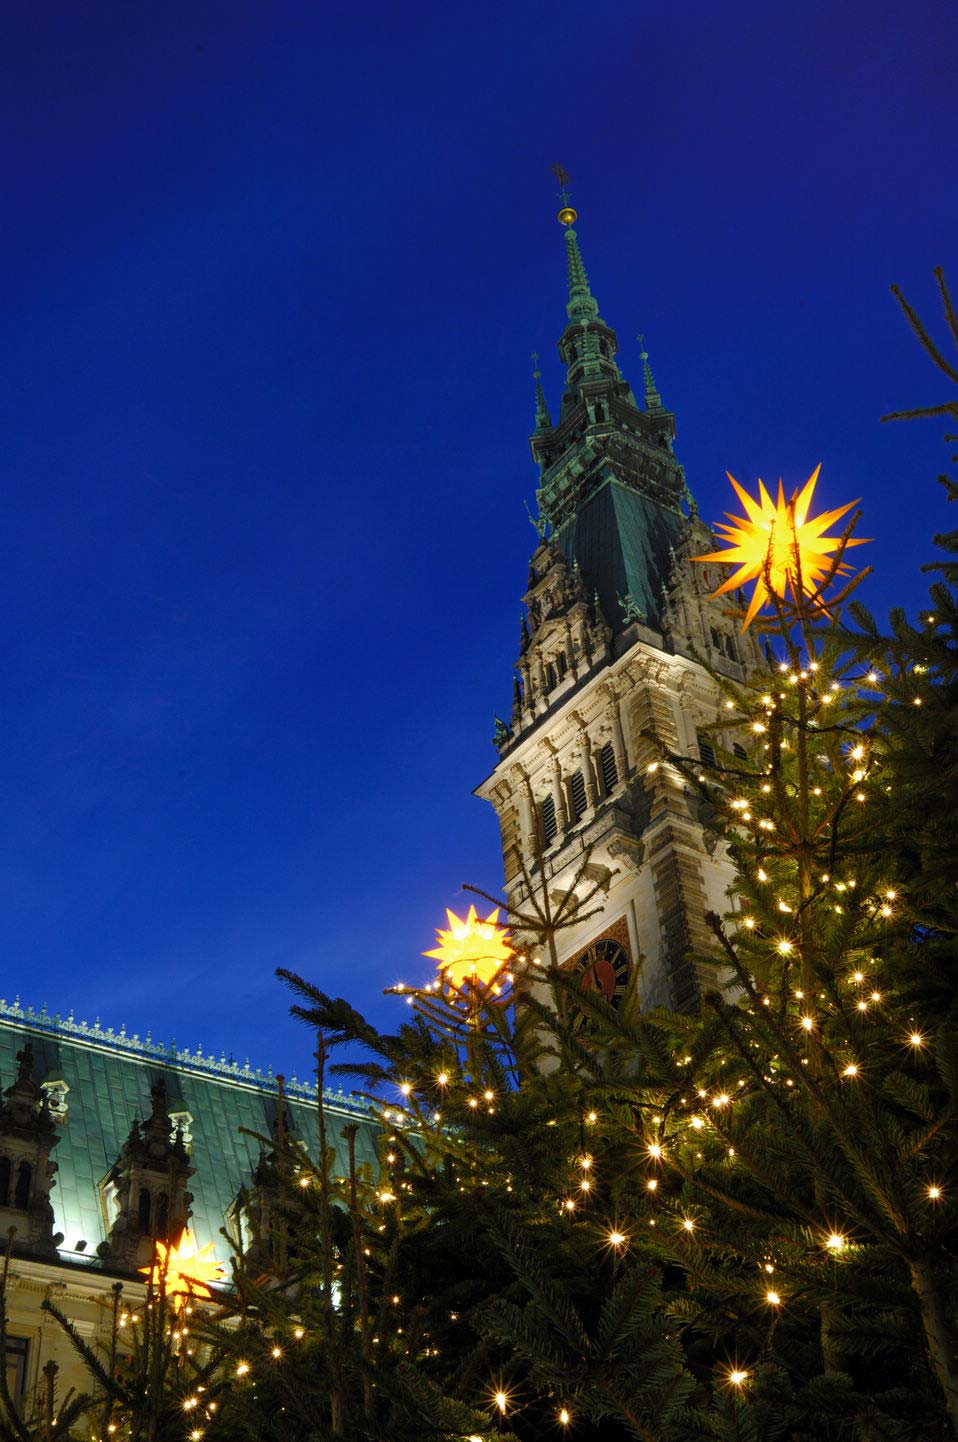 The Christmas market in Hamburg, Germany on November 29, 2012. Hamburg has shaken off its wartime damage to emerge into a glorious present. (Provided to People's Daily Online)